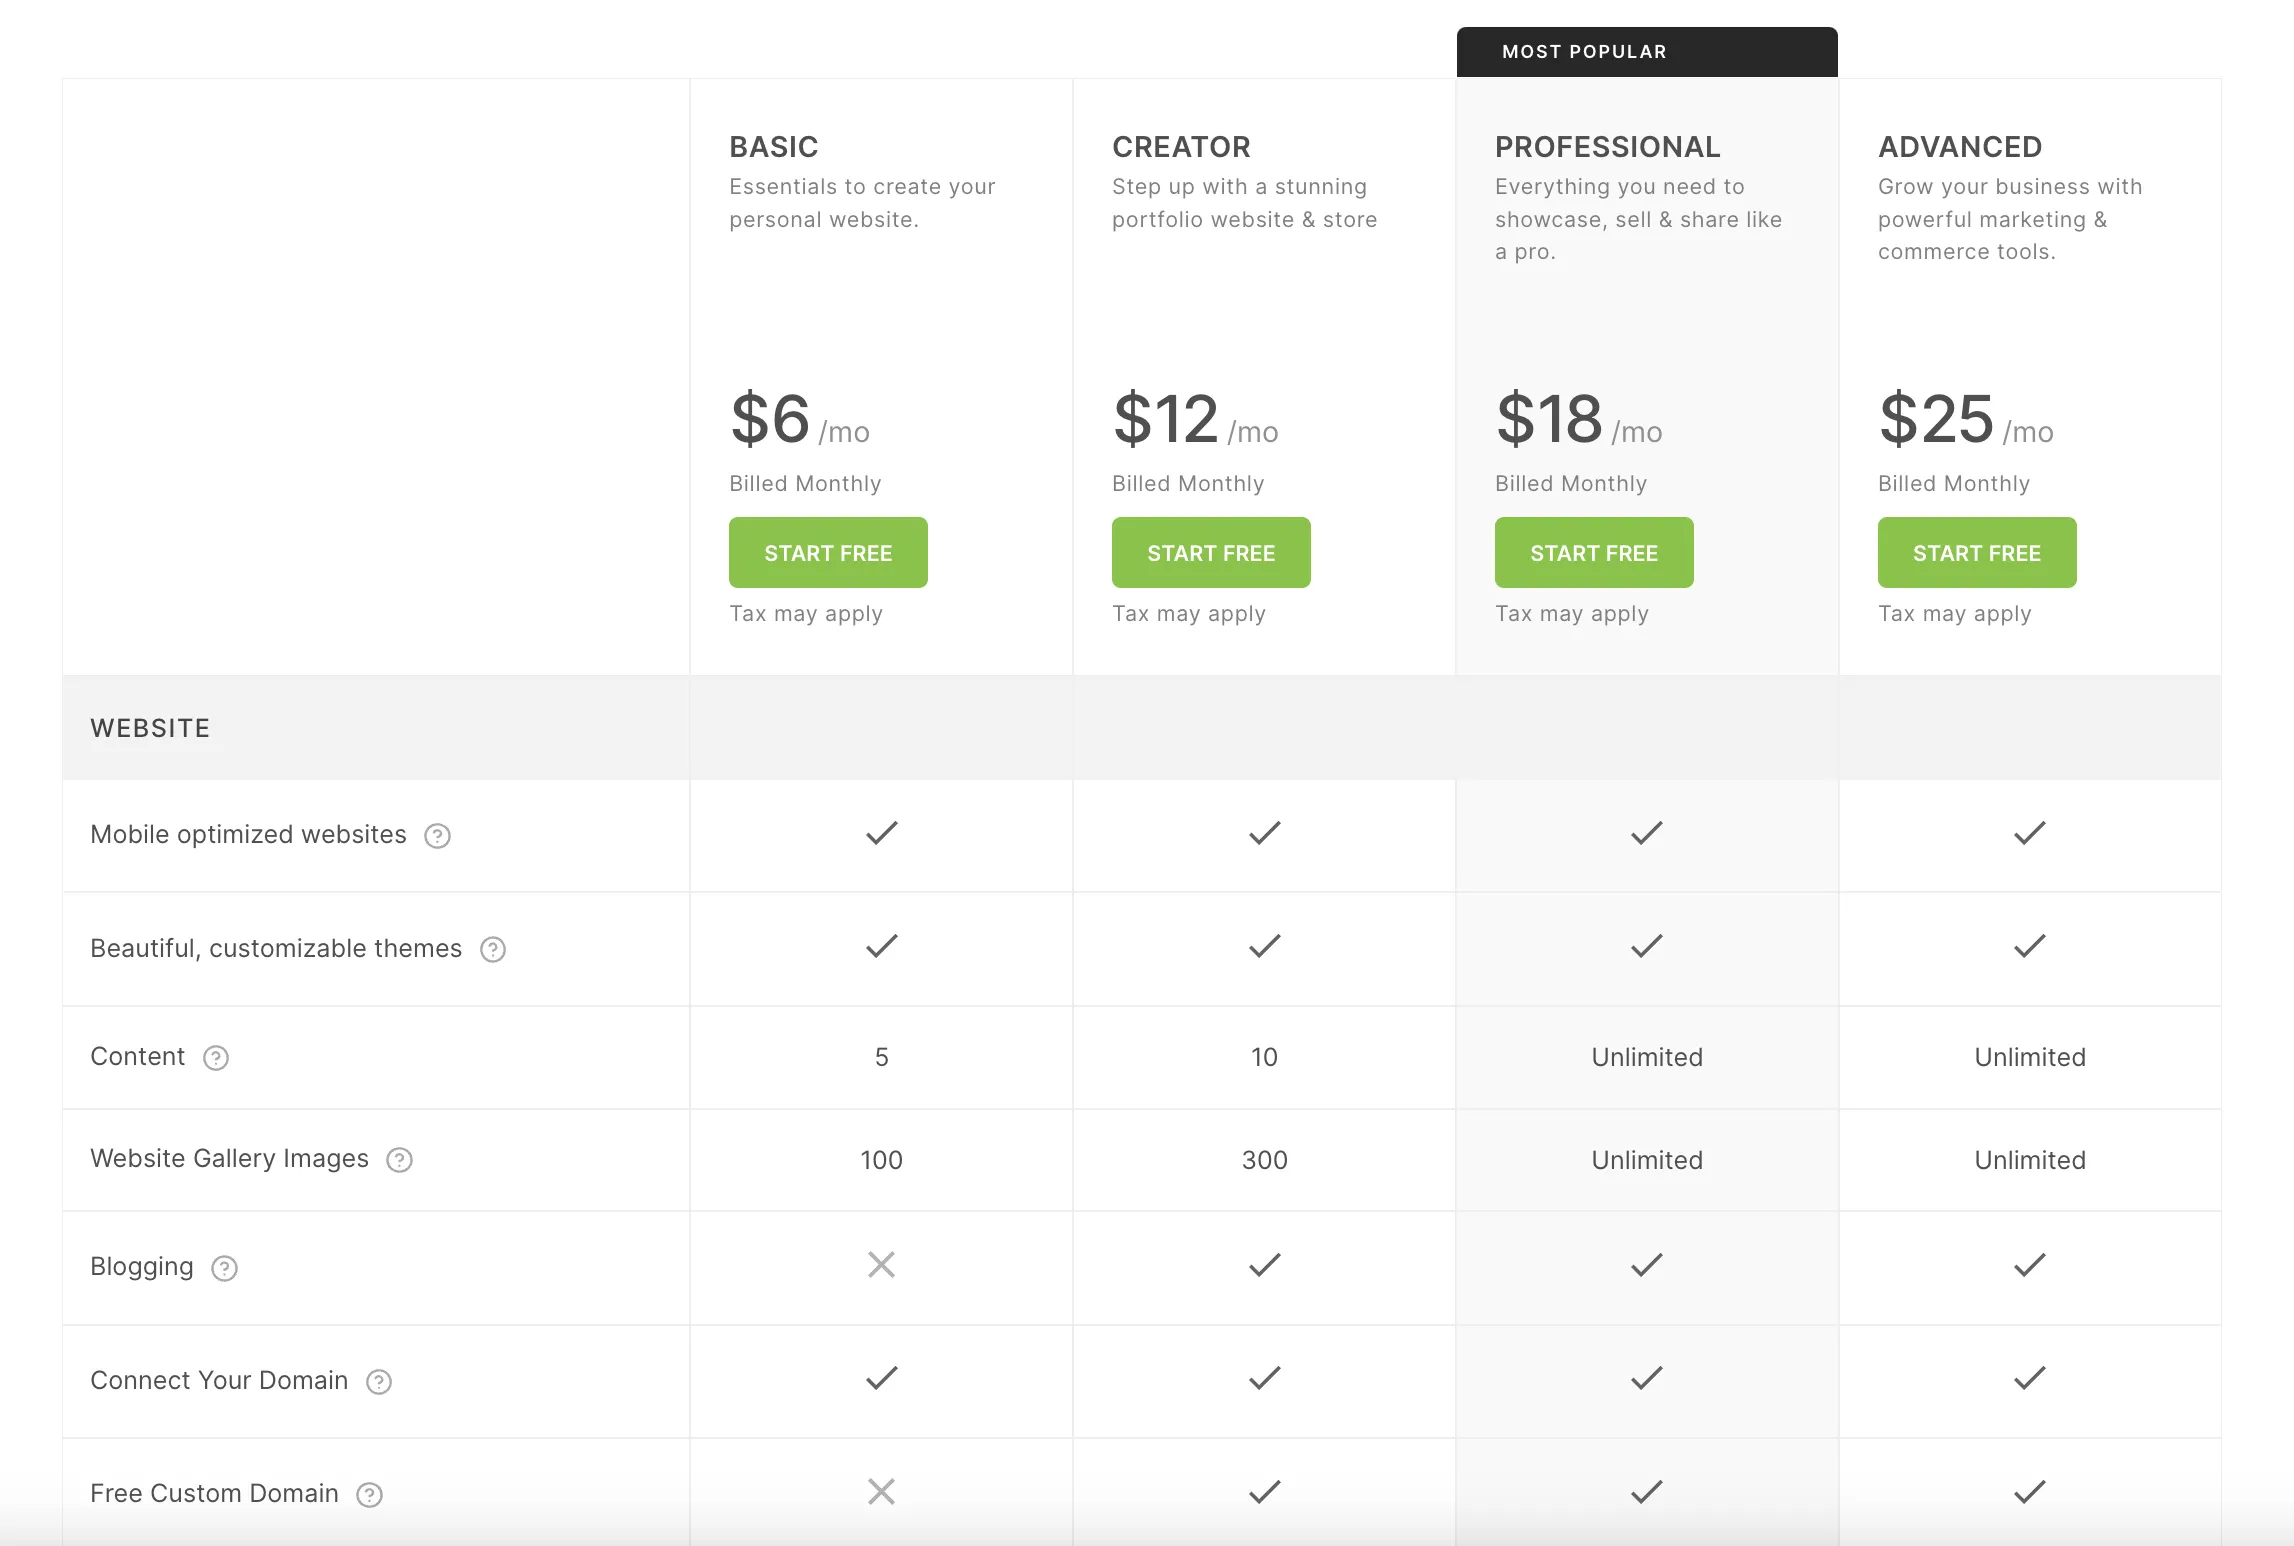 Pricing plans of Pixpa